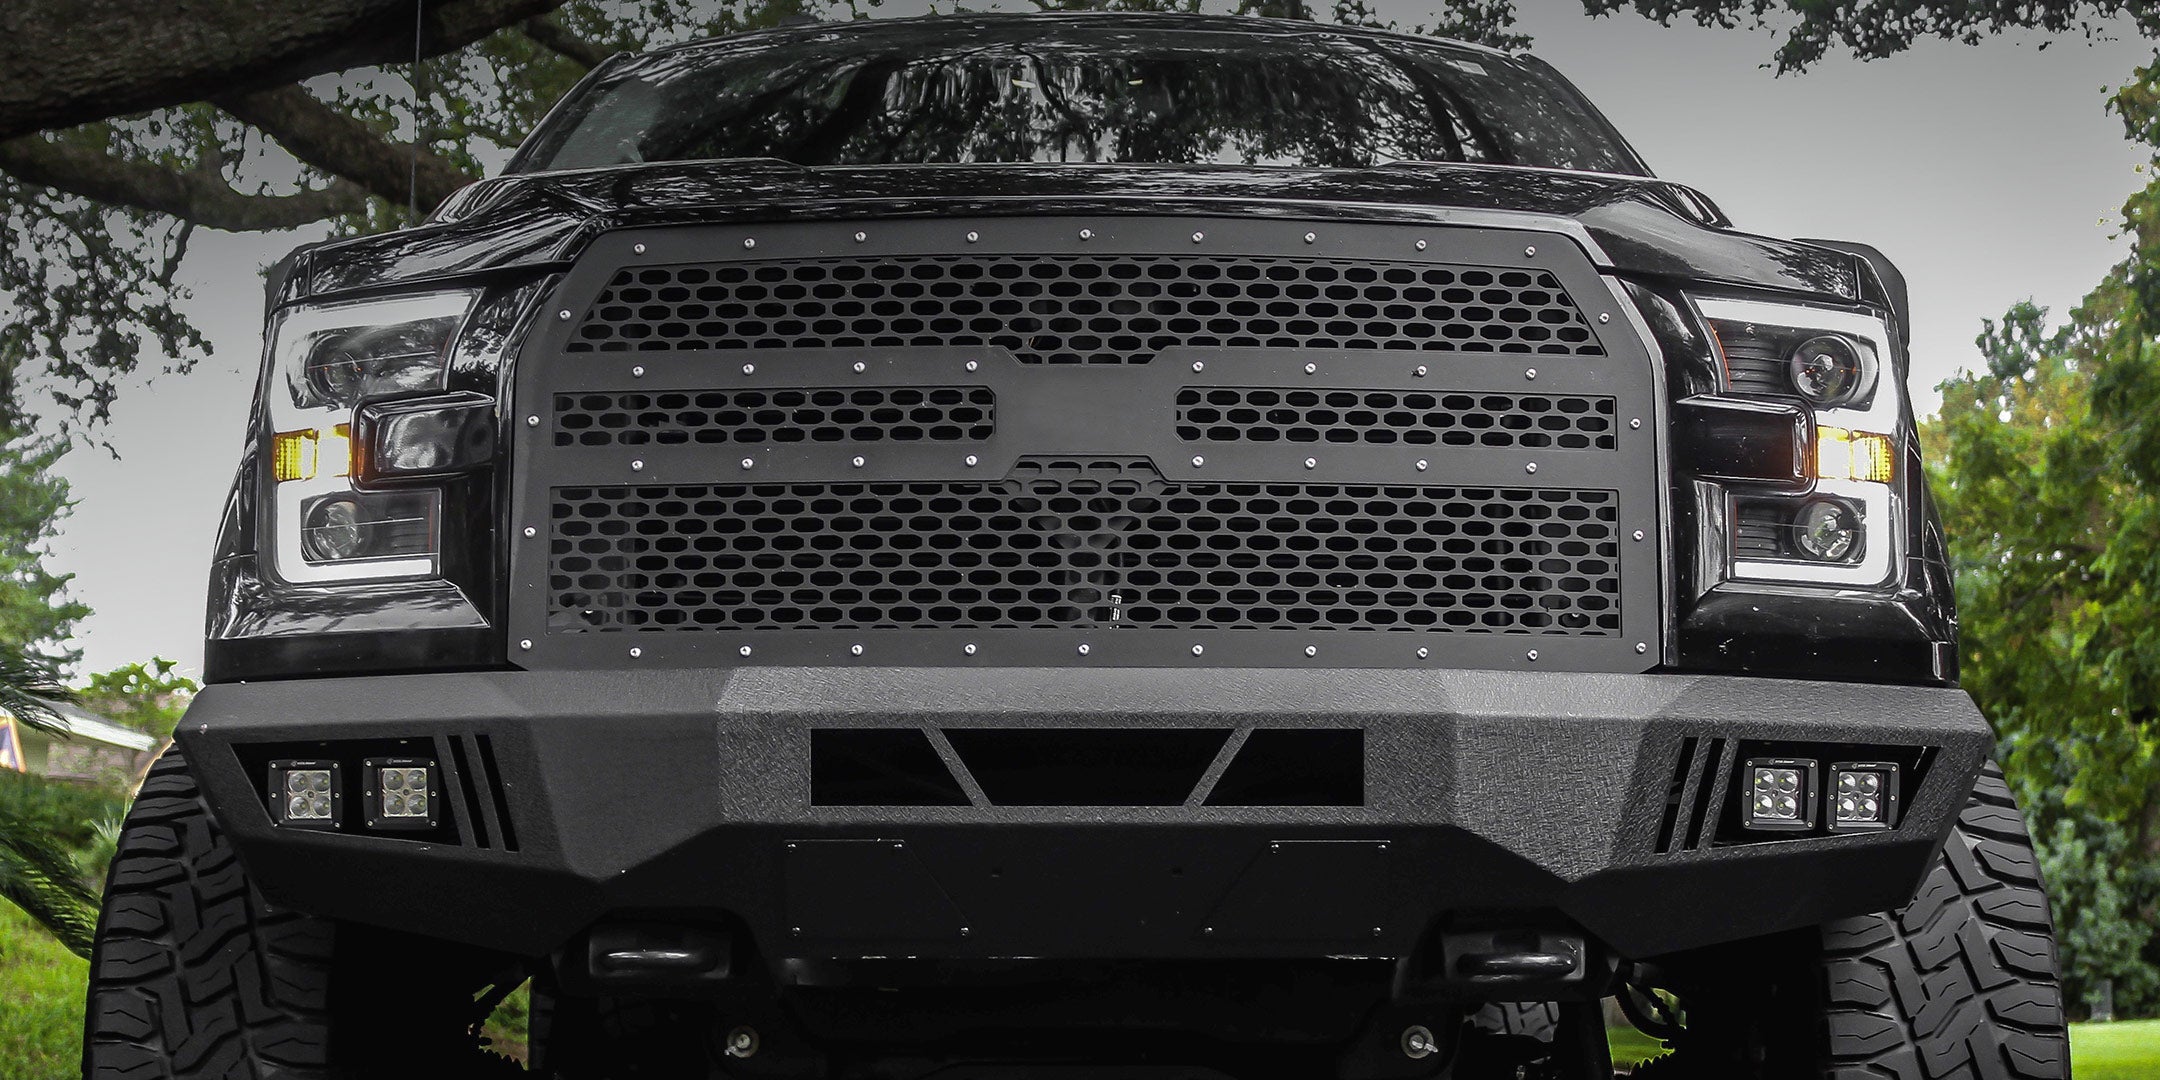 Body Armor 4x4's front and rear bumpers, side steps, and universal Ford products are everything you need to make your Ford the toughest of the bunch.